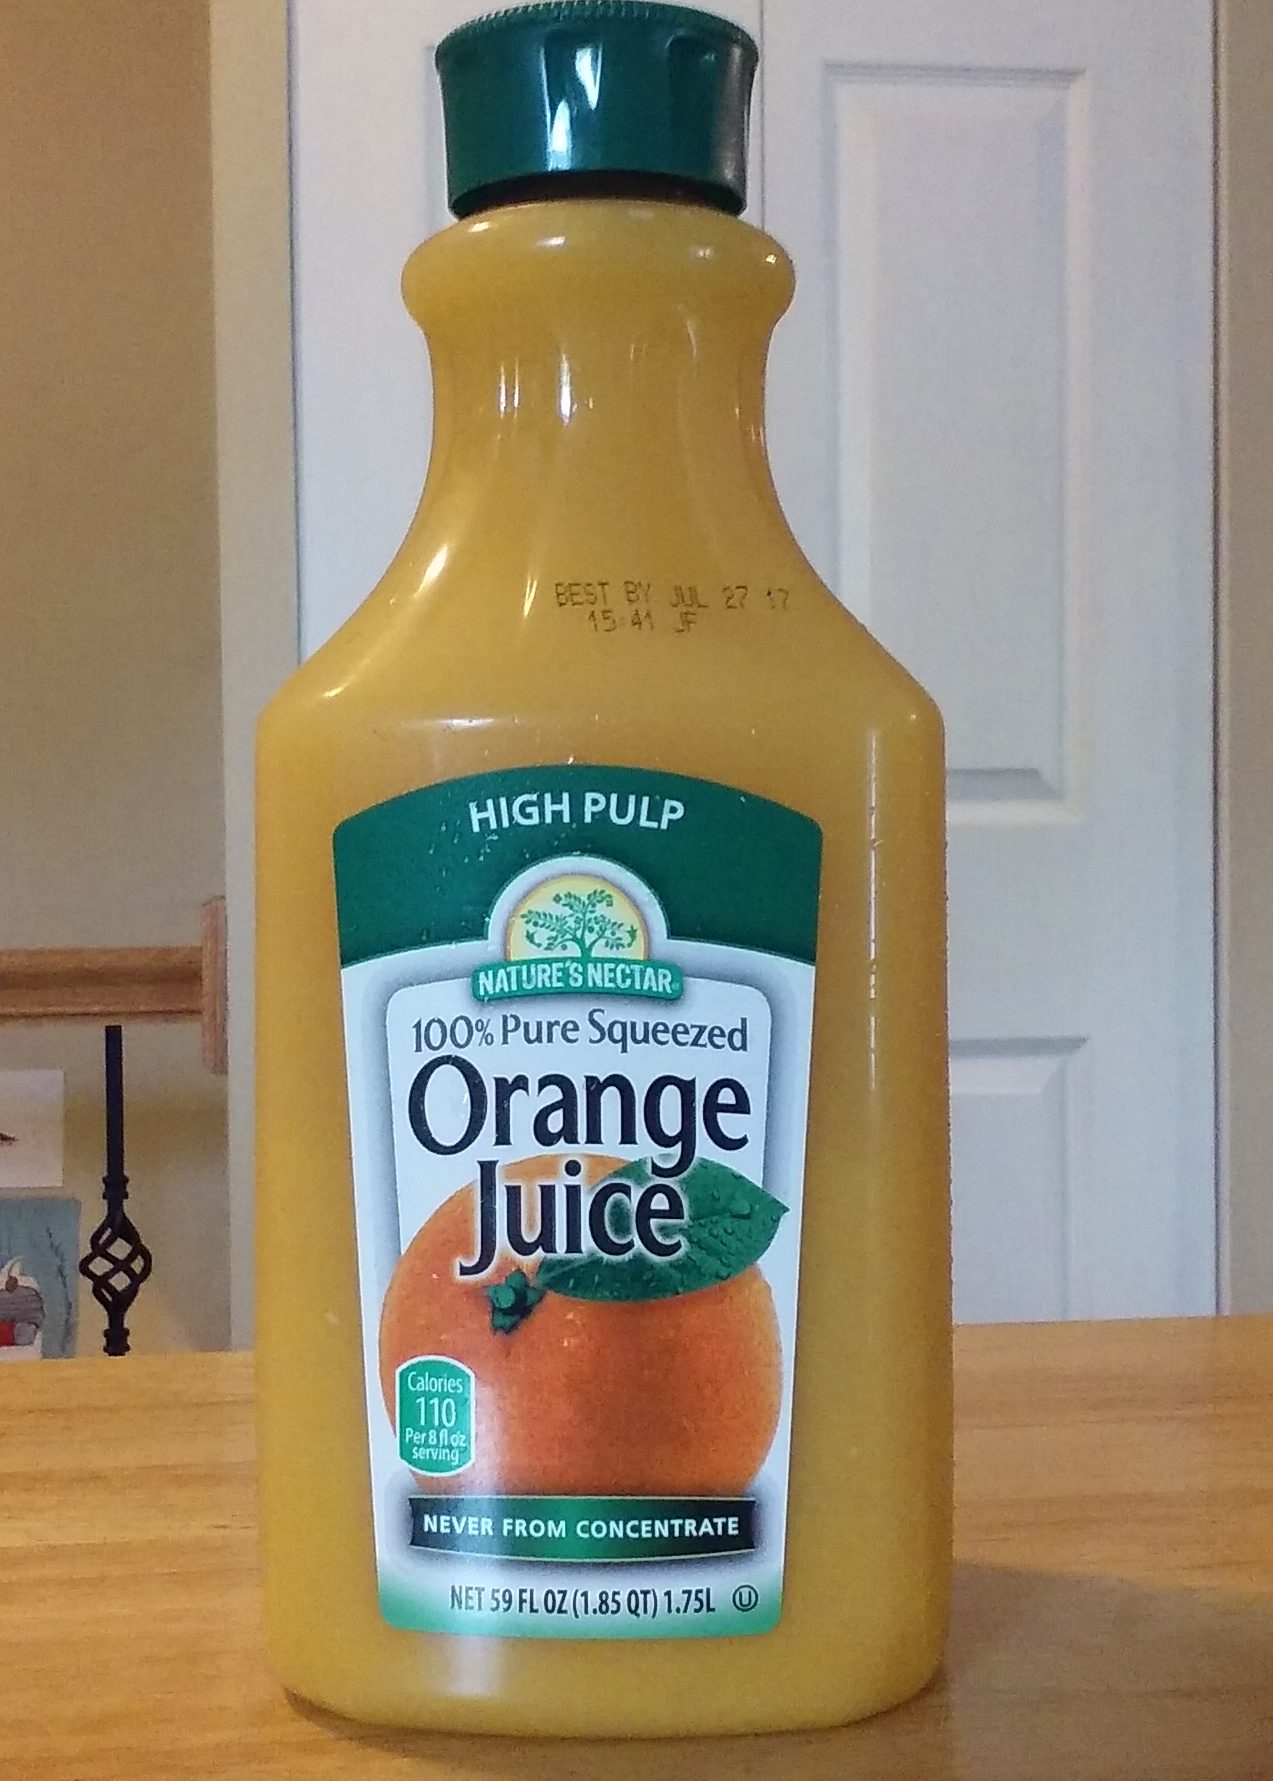 Nature's Nectar 100% Pure Squeezed Orange Juice High Pulp